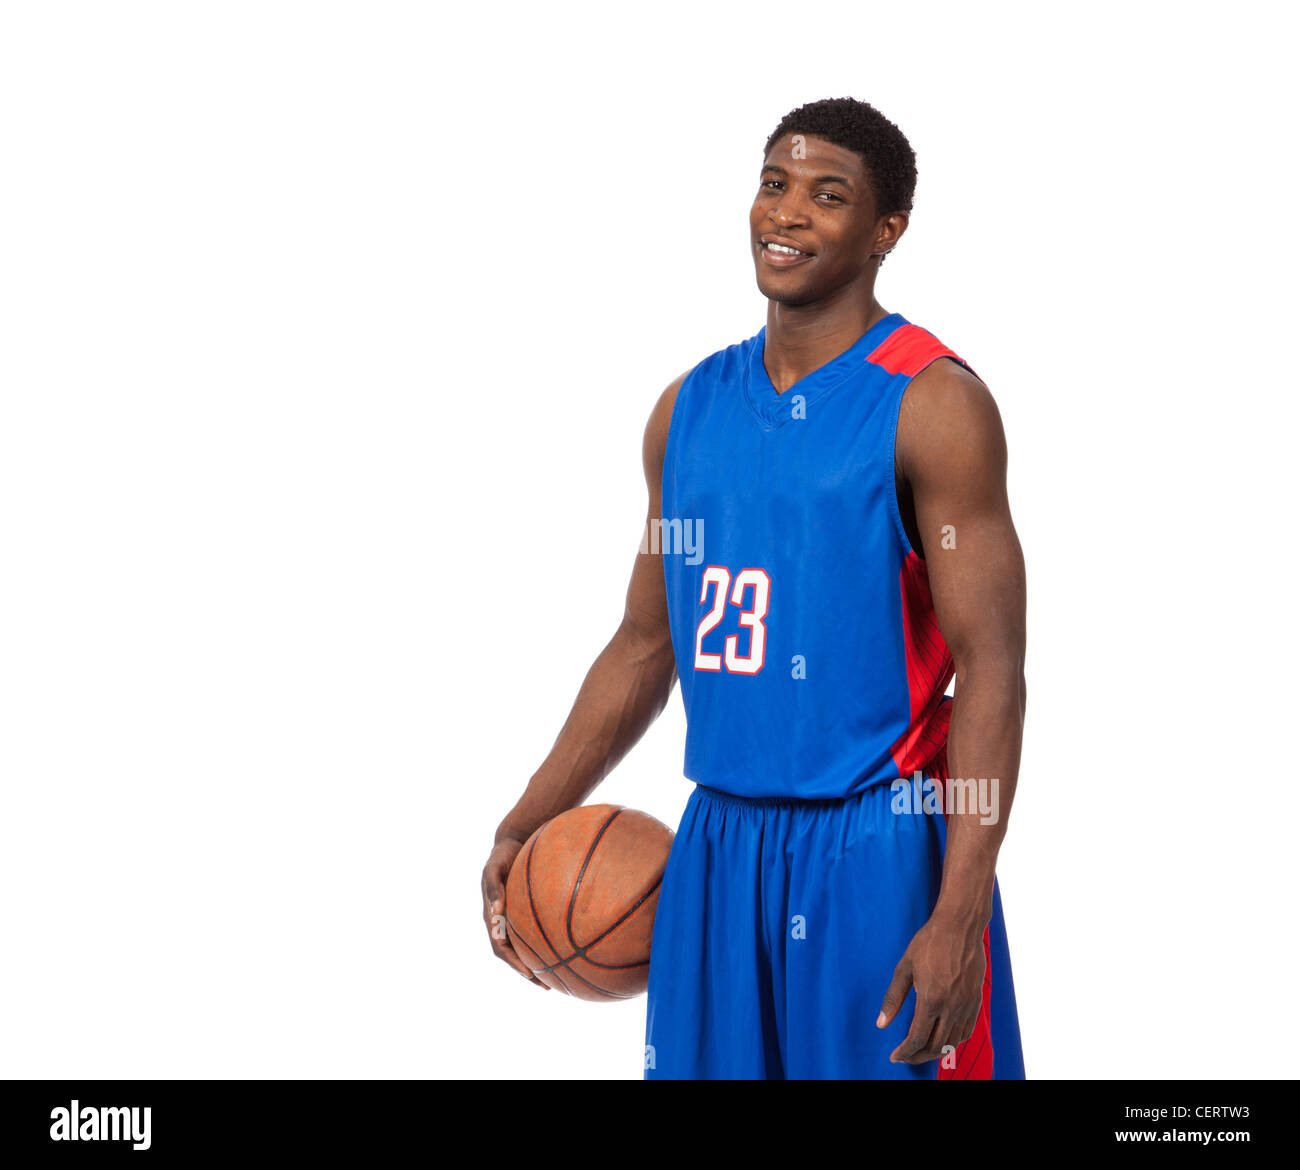 Male Basketball player in blue uniform on white background Stock Photo